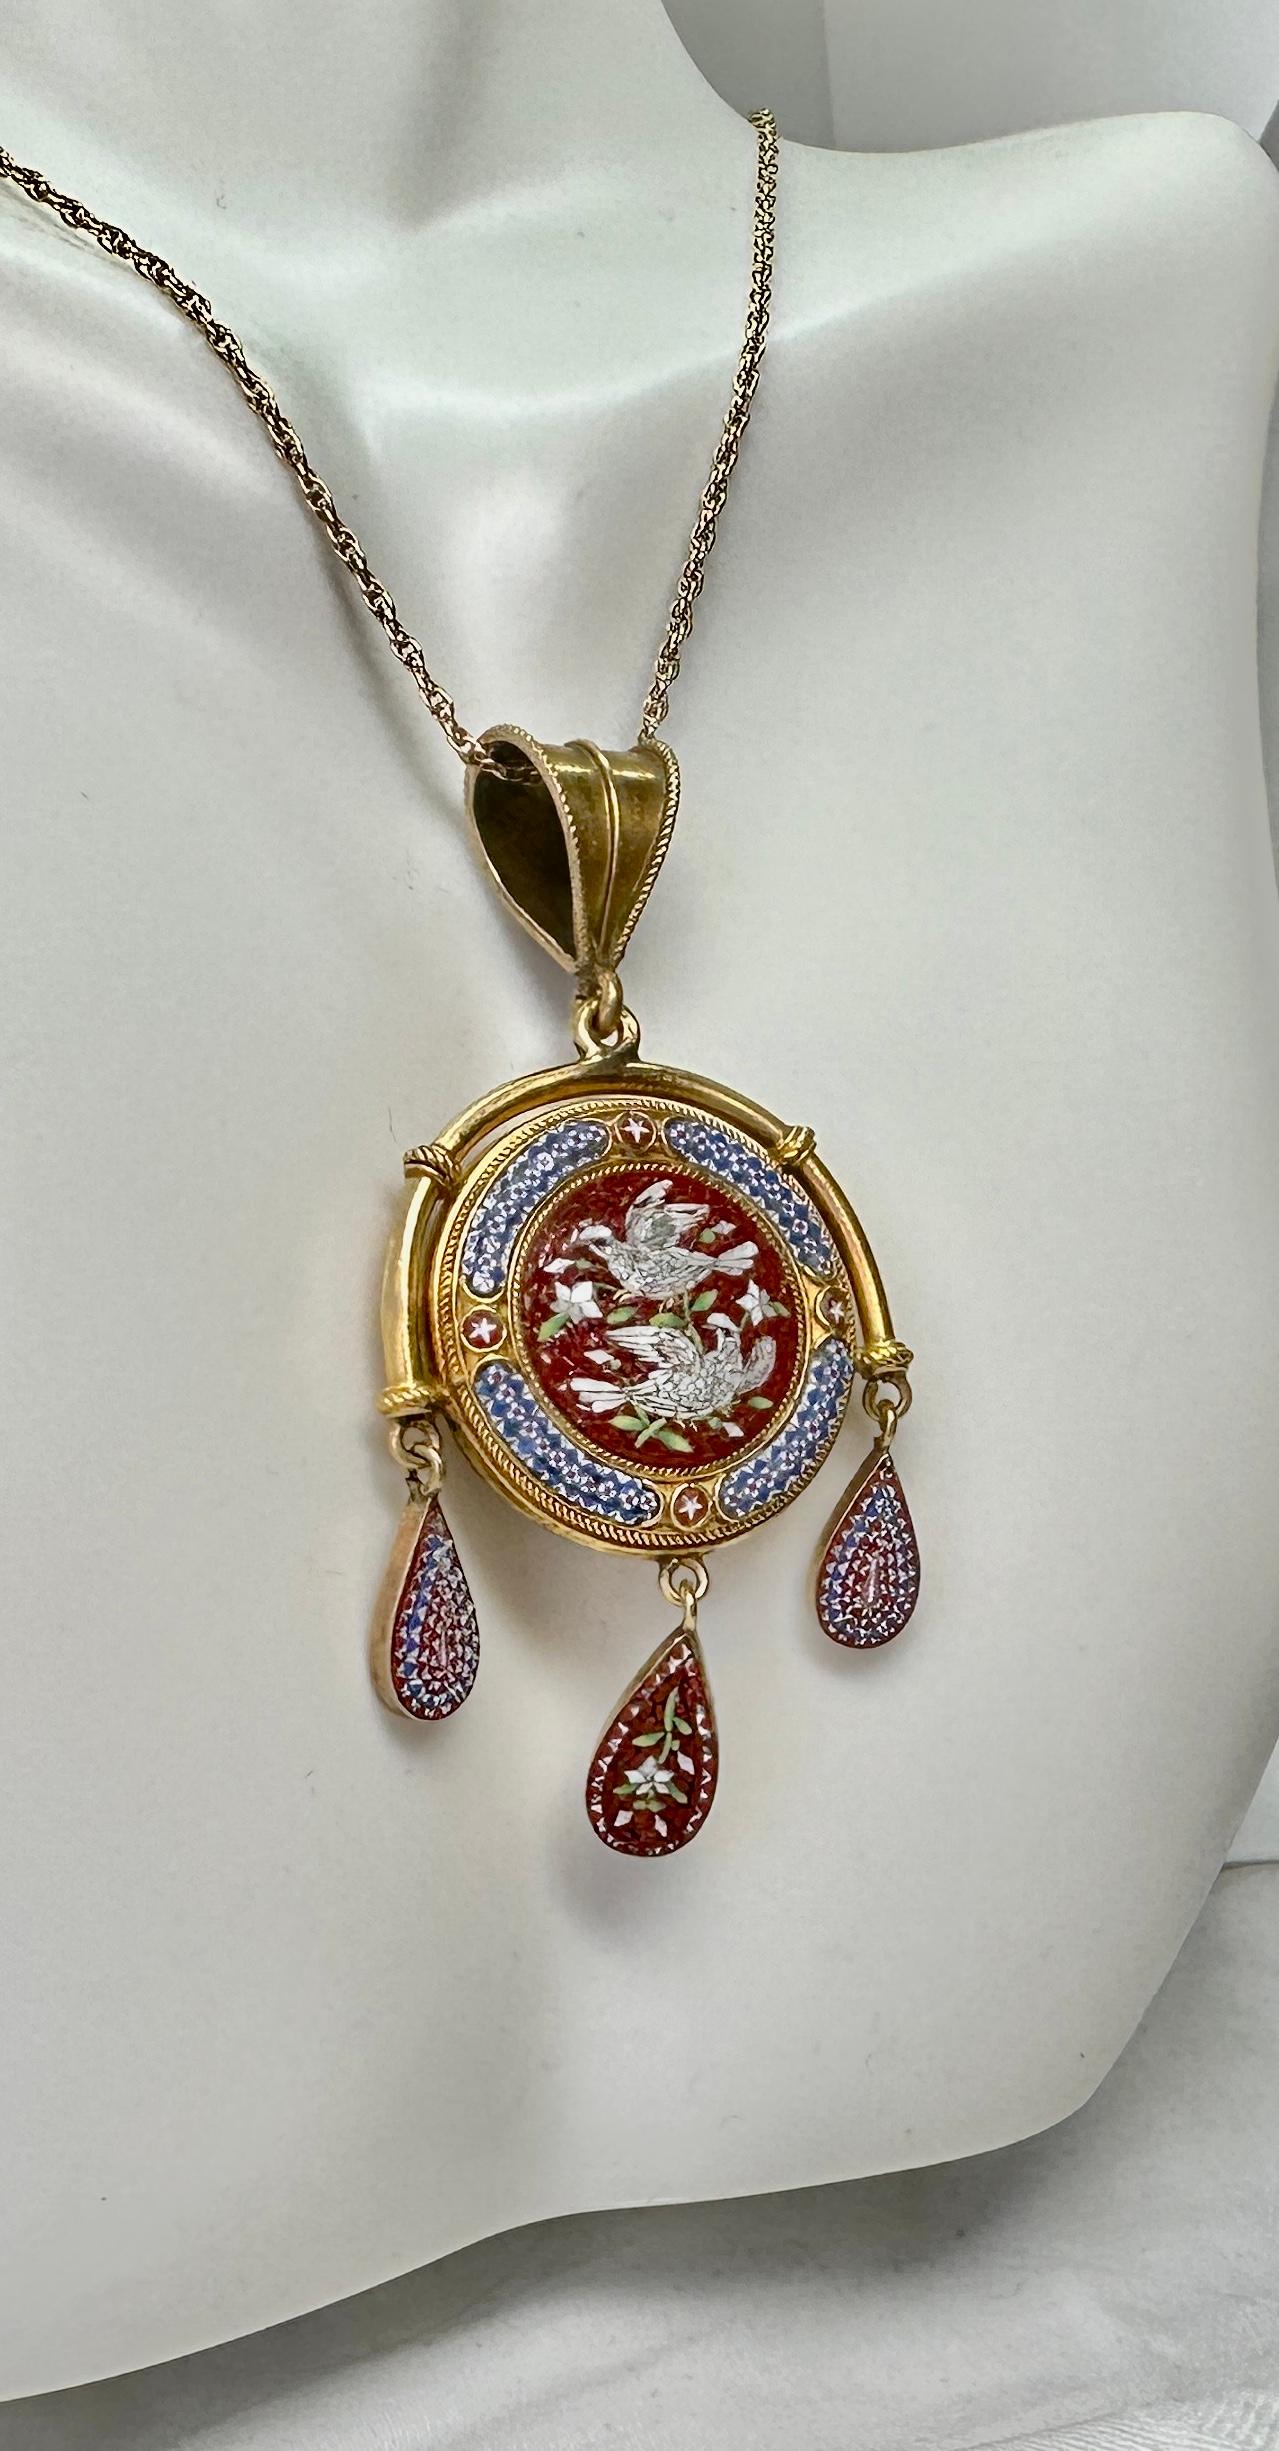 Micromosaic Love Bird Dove Locket Necklace Etruscan Revival Victorian 14k Gold For Sale 4